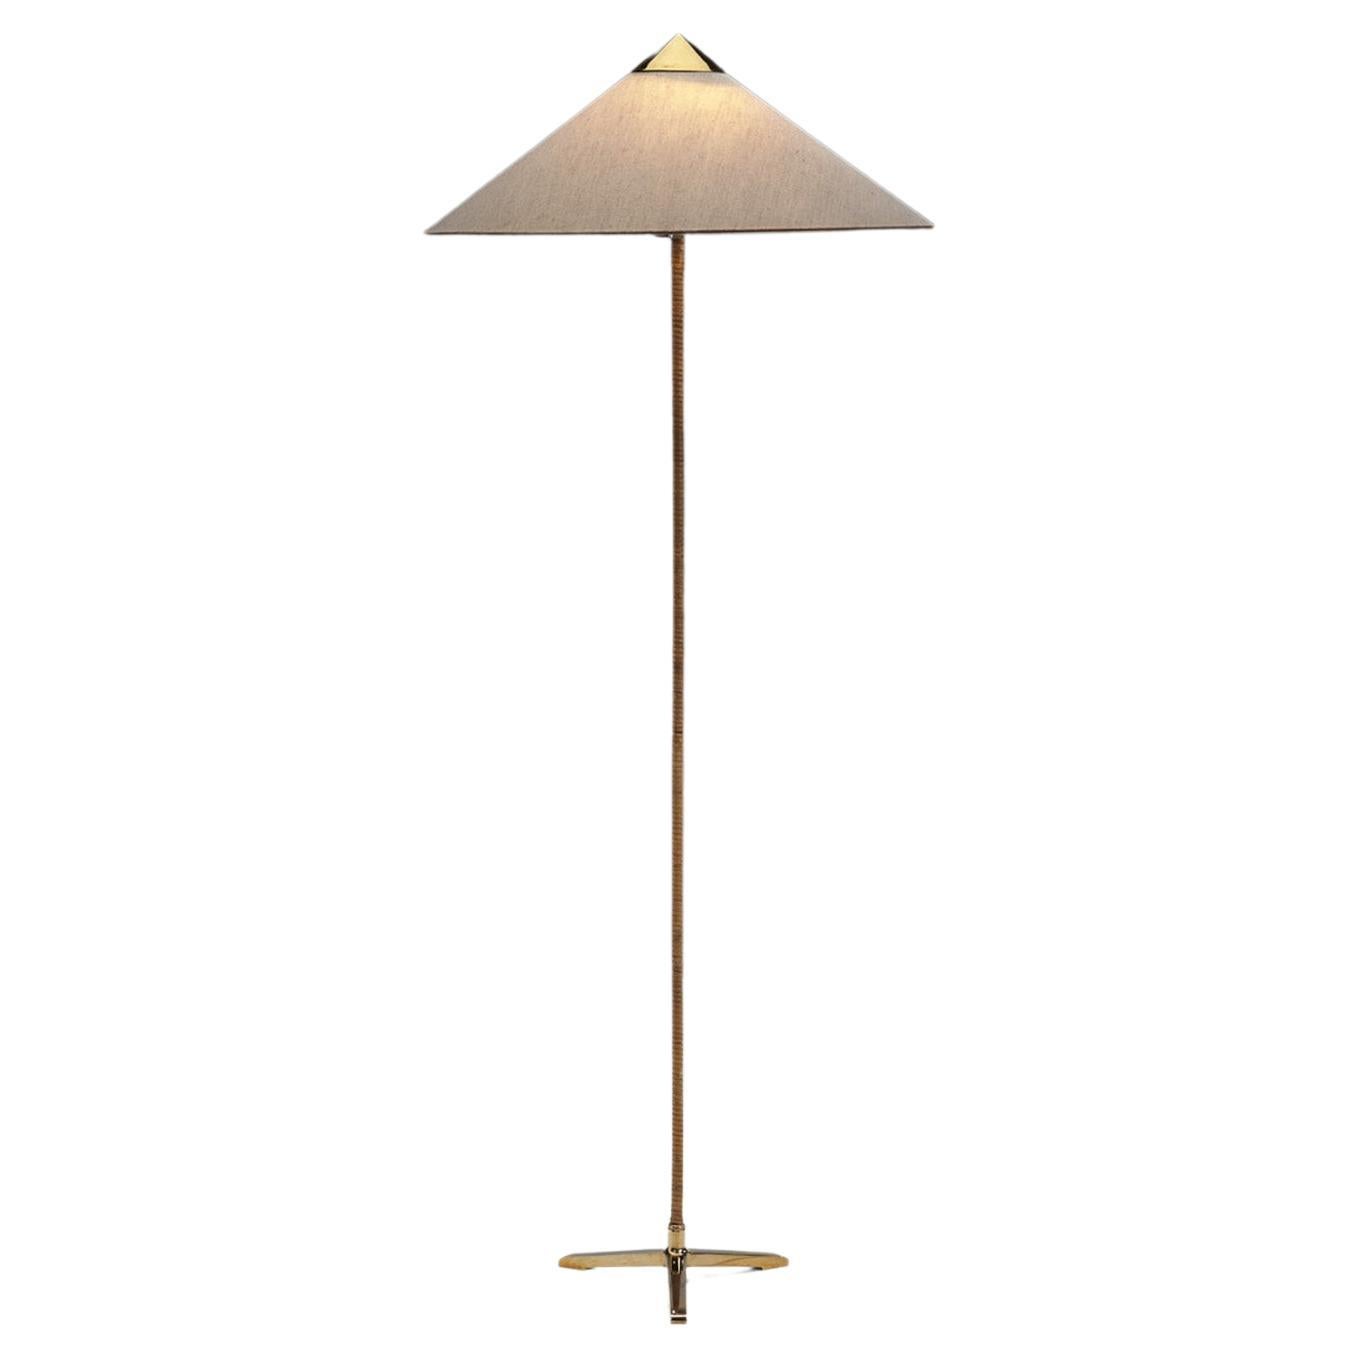 Paavo Tynell "9602" Brass Floor Lamp for Taito Oy, Finland, 1950s